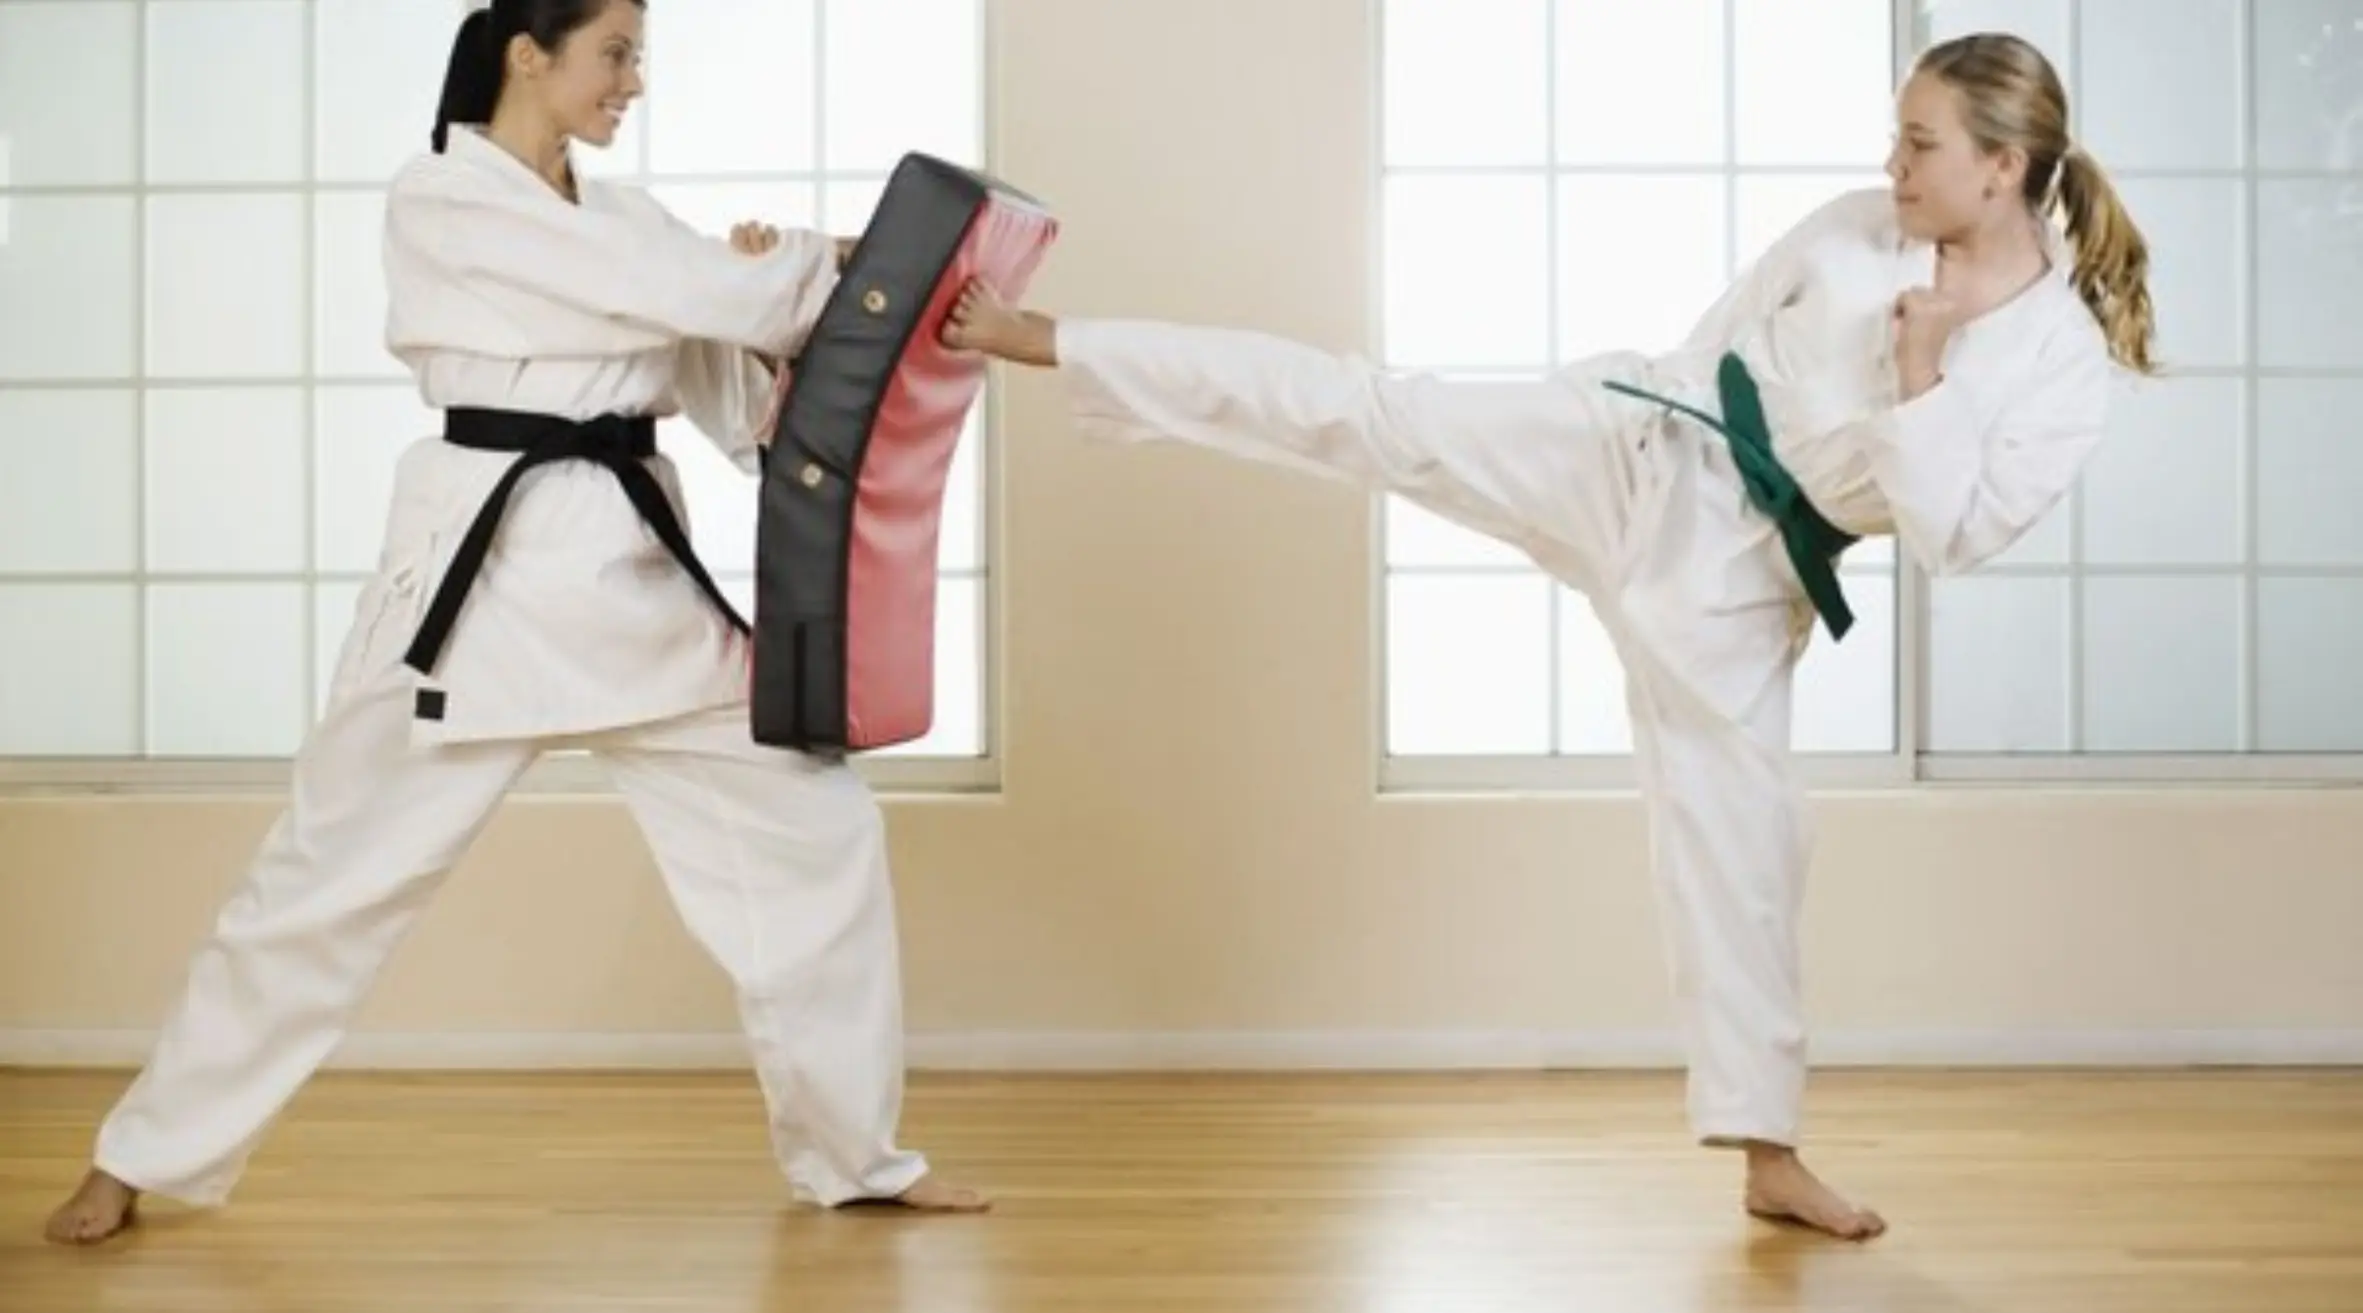 Enhancing the development of martial arts serves as a lever for growth for the European regions